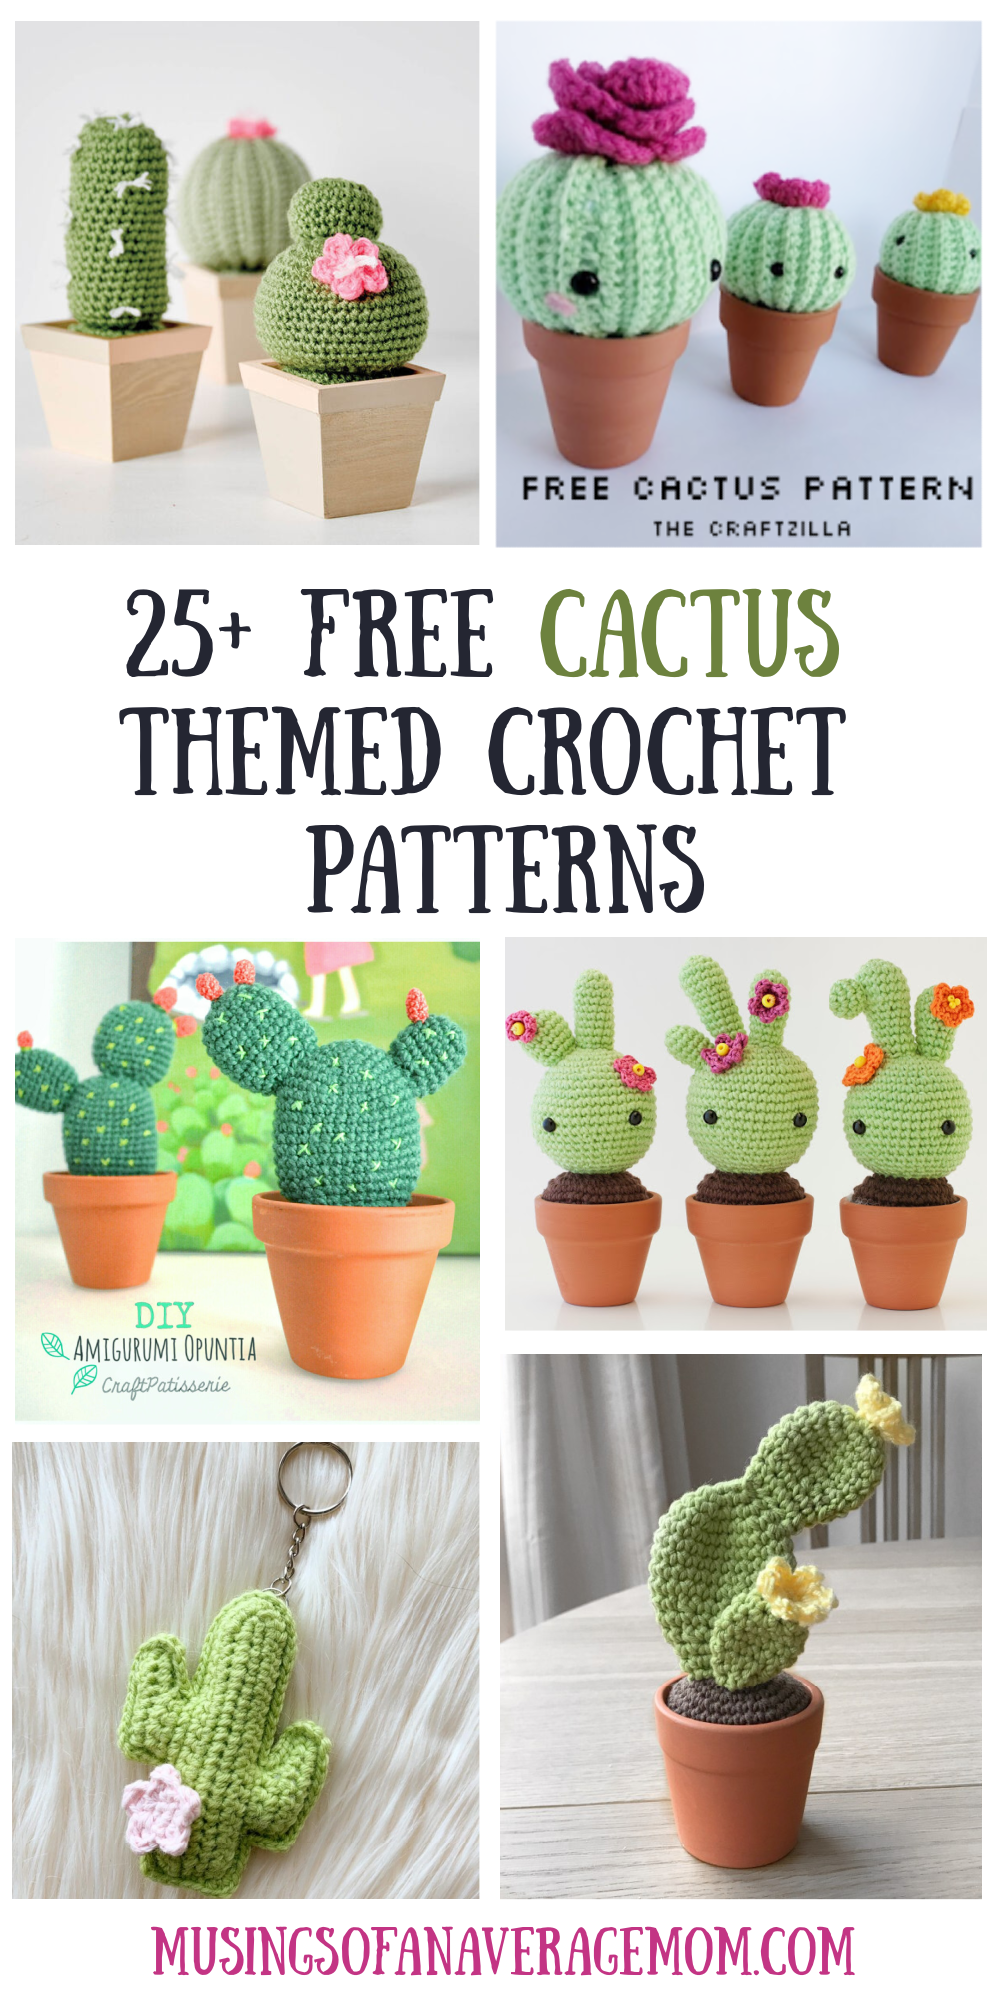 Musings of an Average Mom: Free Cactus Themed Crochet Patterns